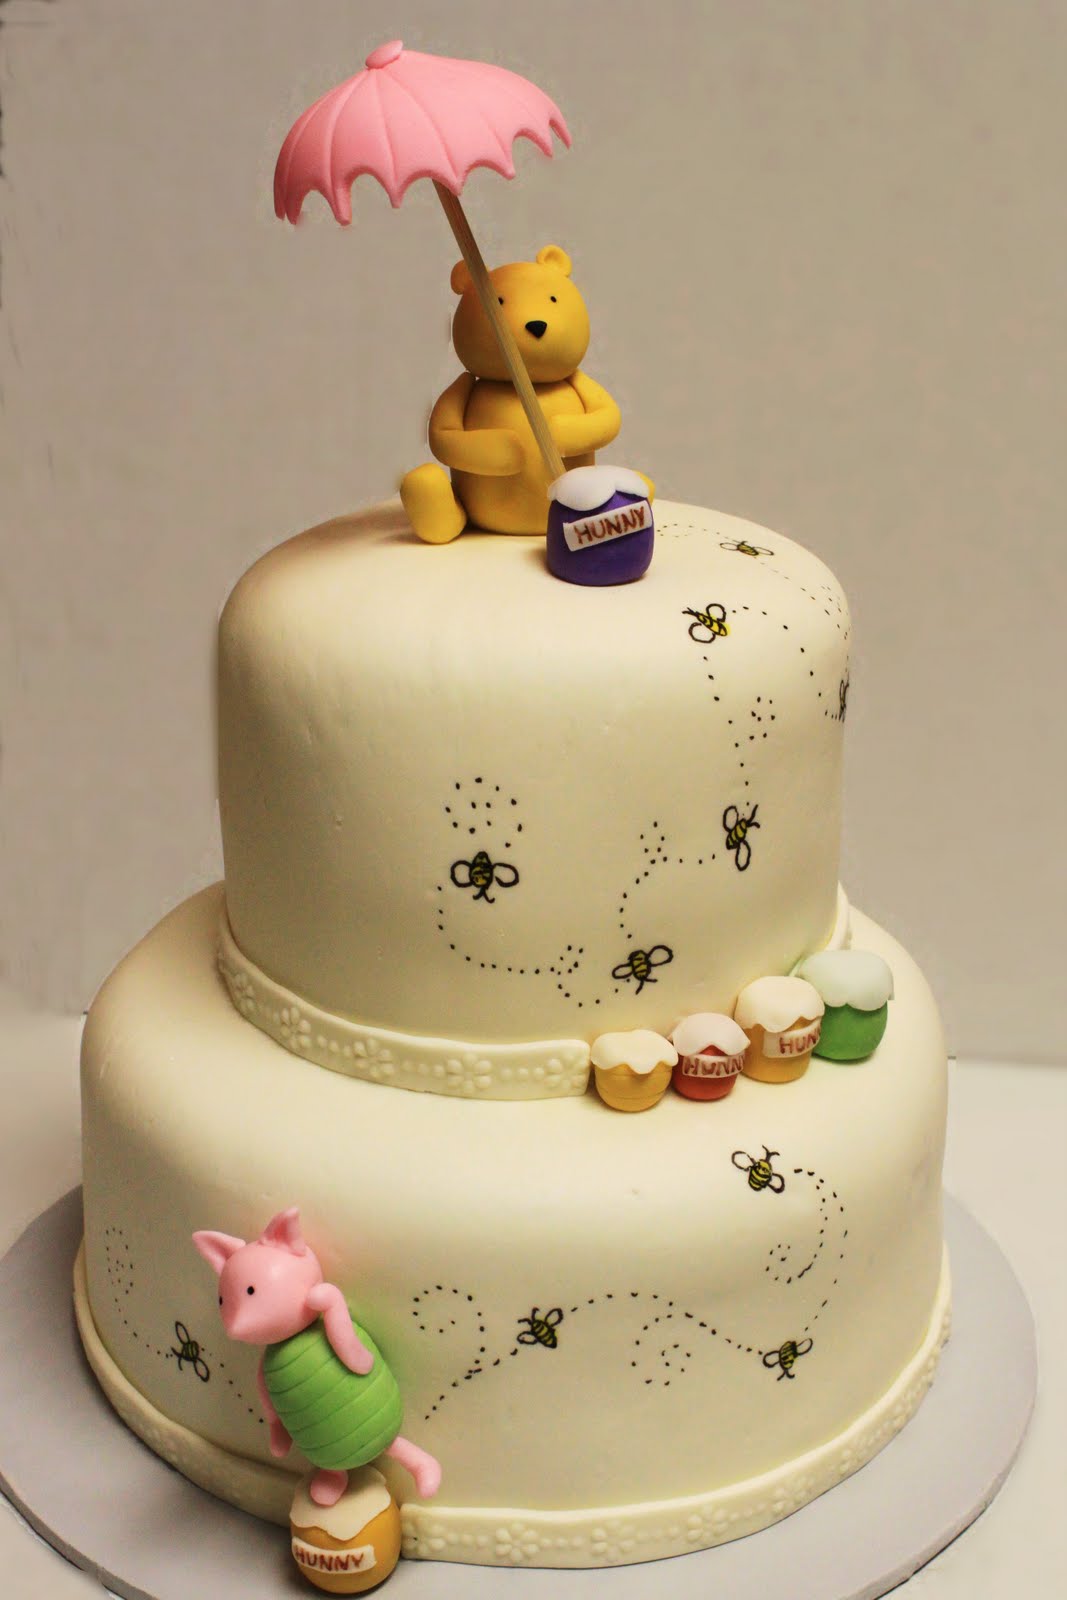 Winnie the Pooh Baby Shower – Simple but Truly Enjoyable! | Cardinal Bridal